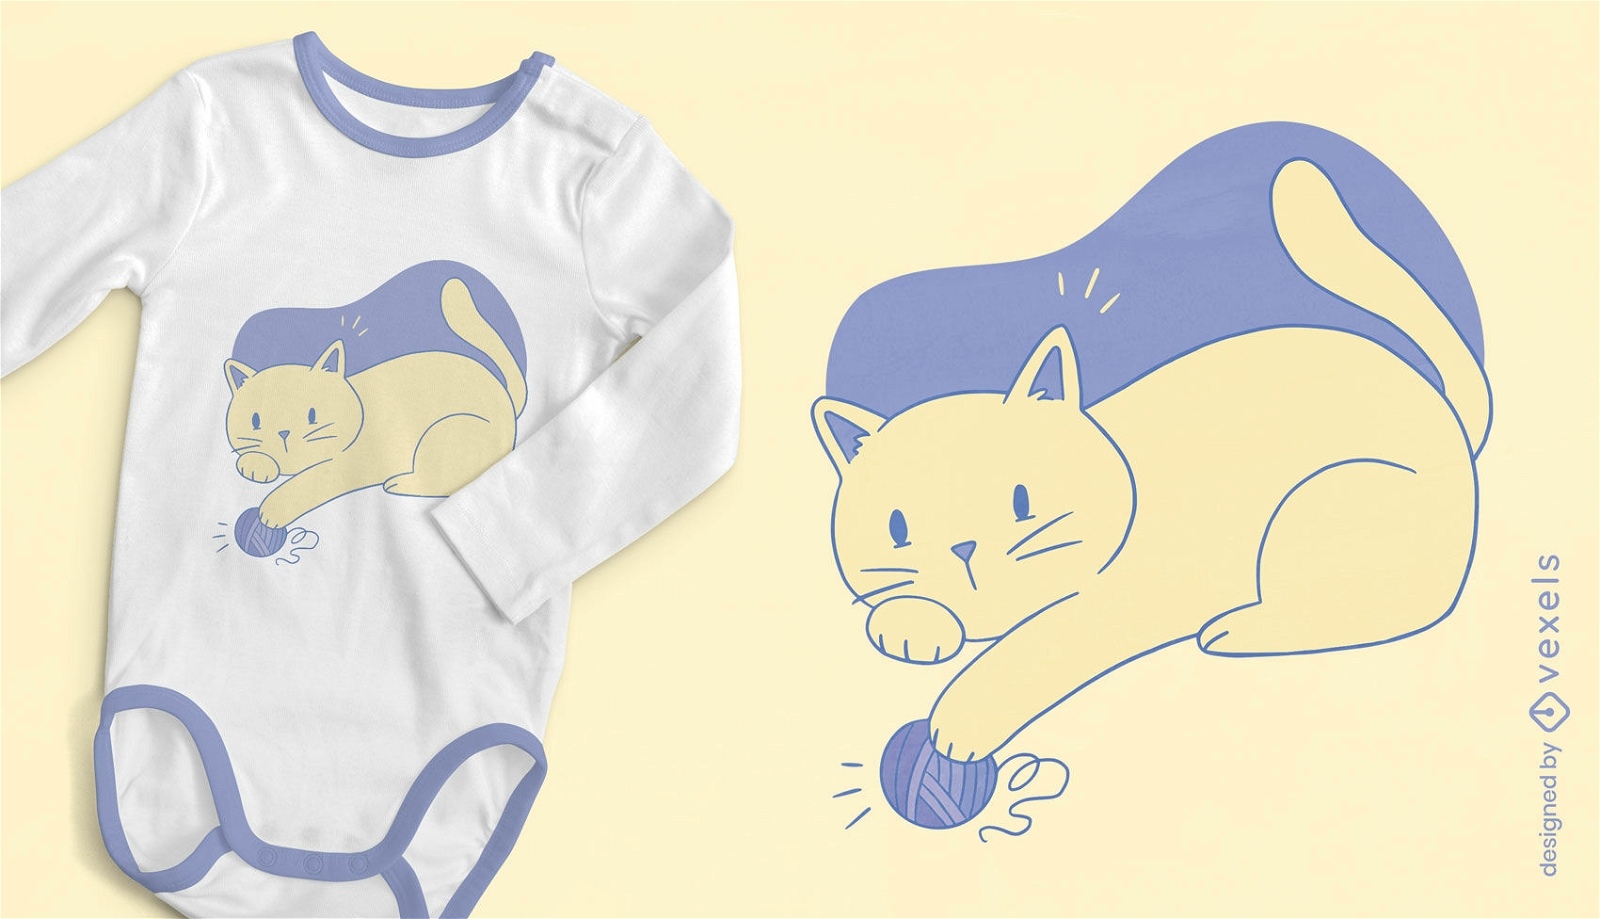 Cat playing with ball of yarn t-shirt design